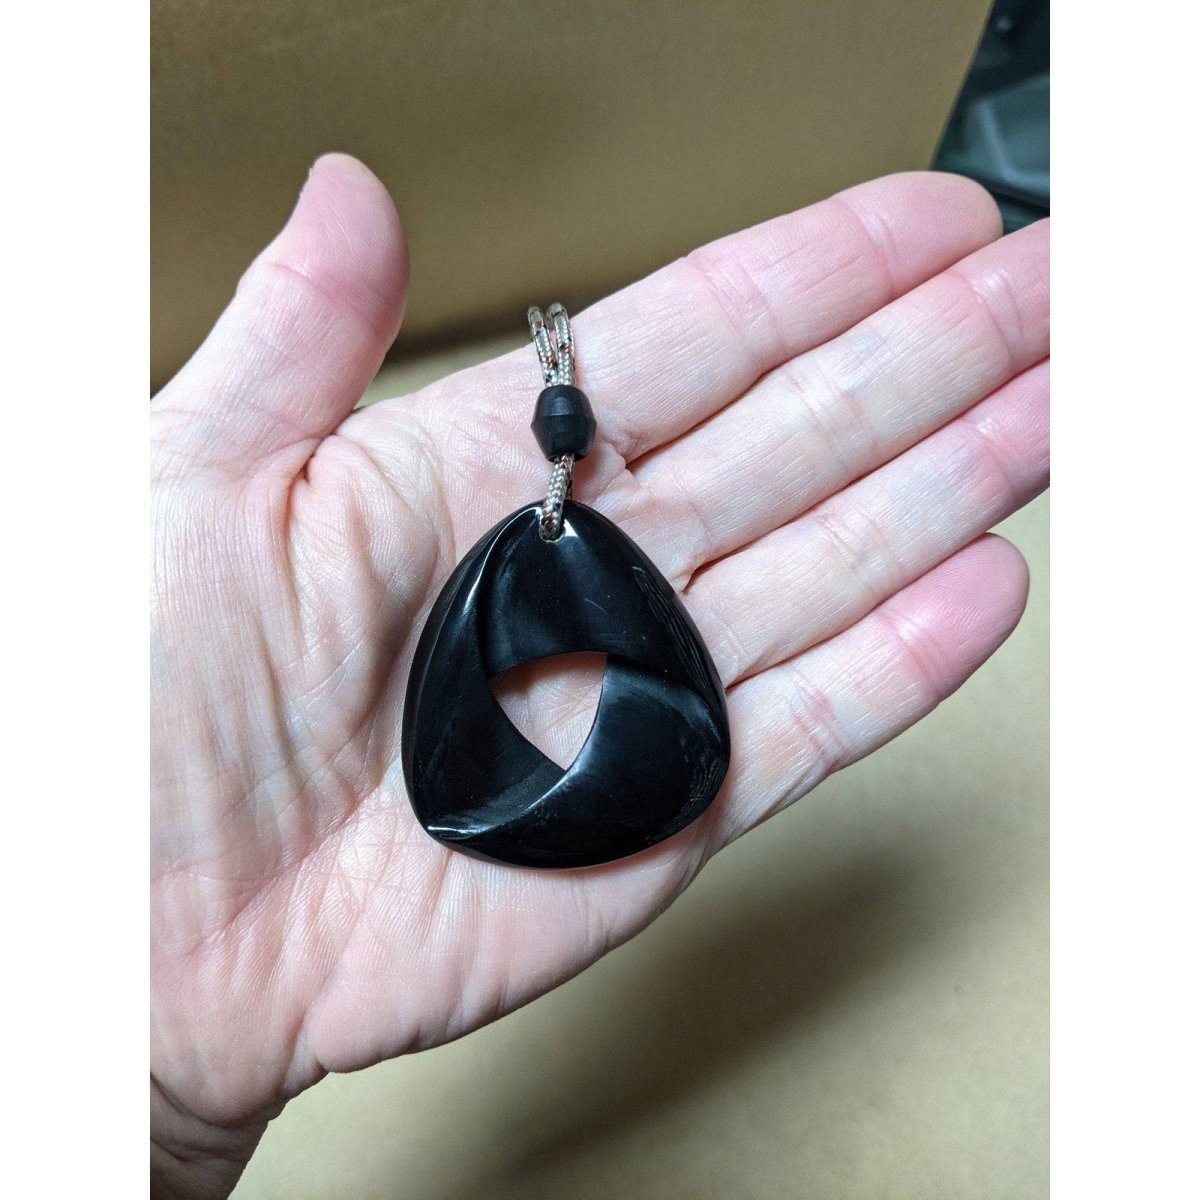 New Zealand Maori Inspired Black Horn Mobius Strip Necklace - Earthbound Pacific